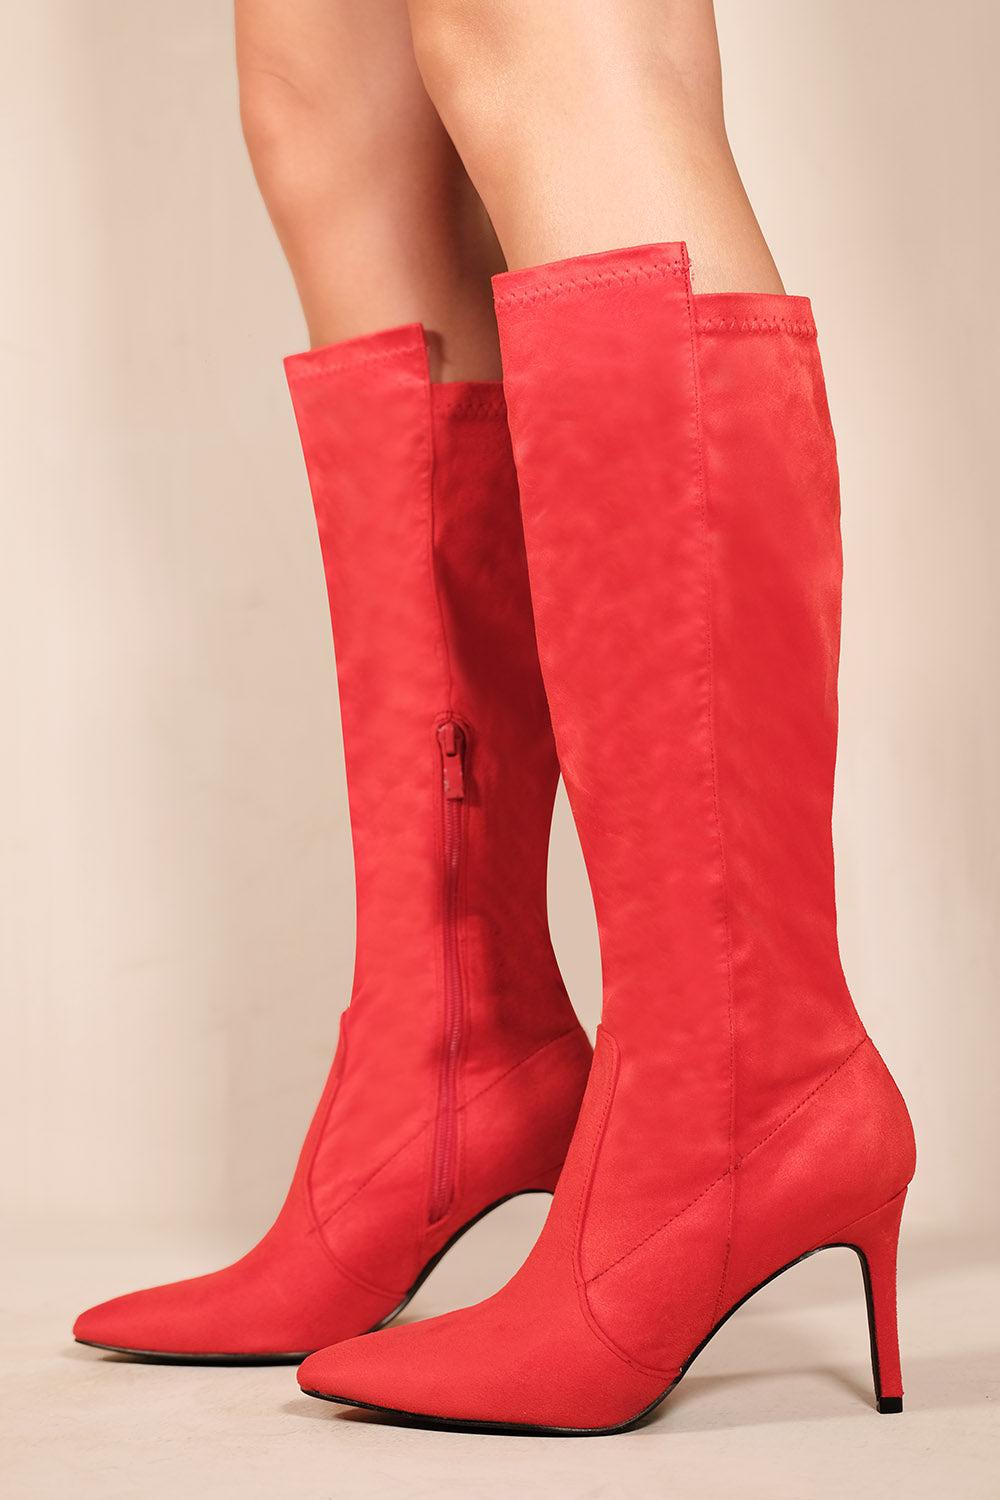 Where's That From Marta Pointed Toe Calf High Boots With Side Zip in Red |  Lyst